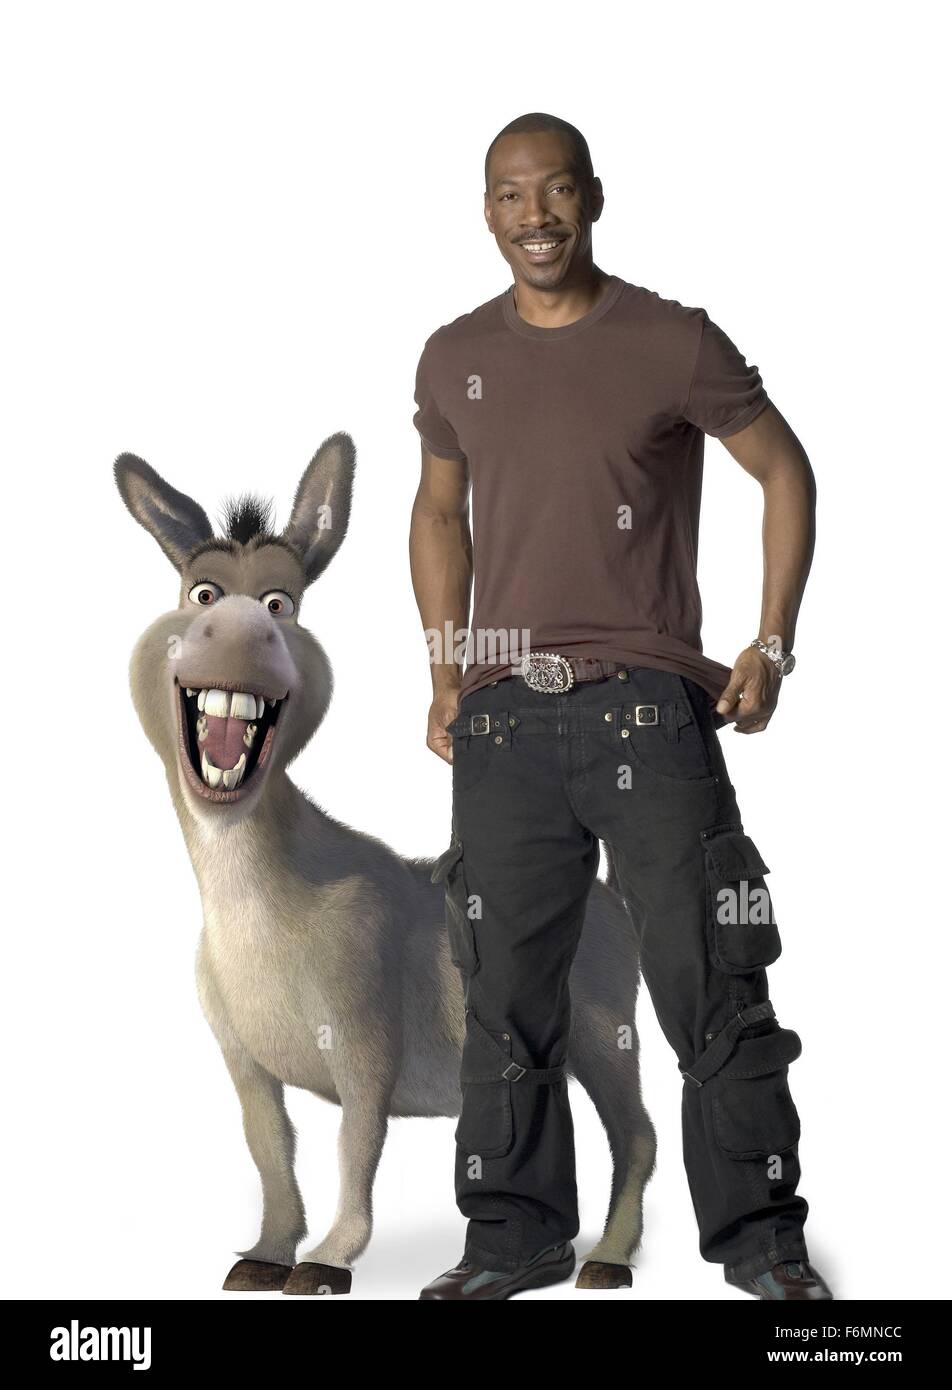 RELEASE DATE: May 21, 2010. MOVIE TITLE: Shrek Forever After. STUDIO: DreamWorks. PLOT: The further adventures of the giant green ogre, Shrek, living in the land of Far, Far Away. PICTURED: EDDIE MURPHY as Donkey. Stock Photo